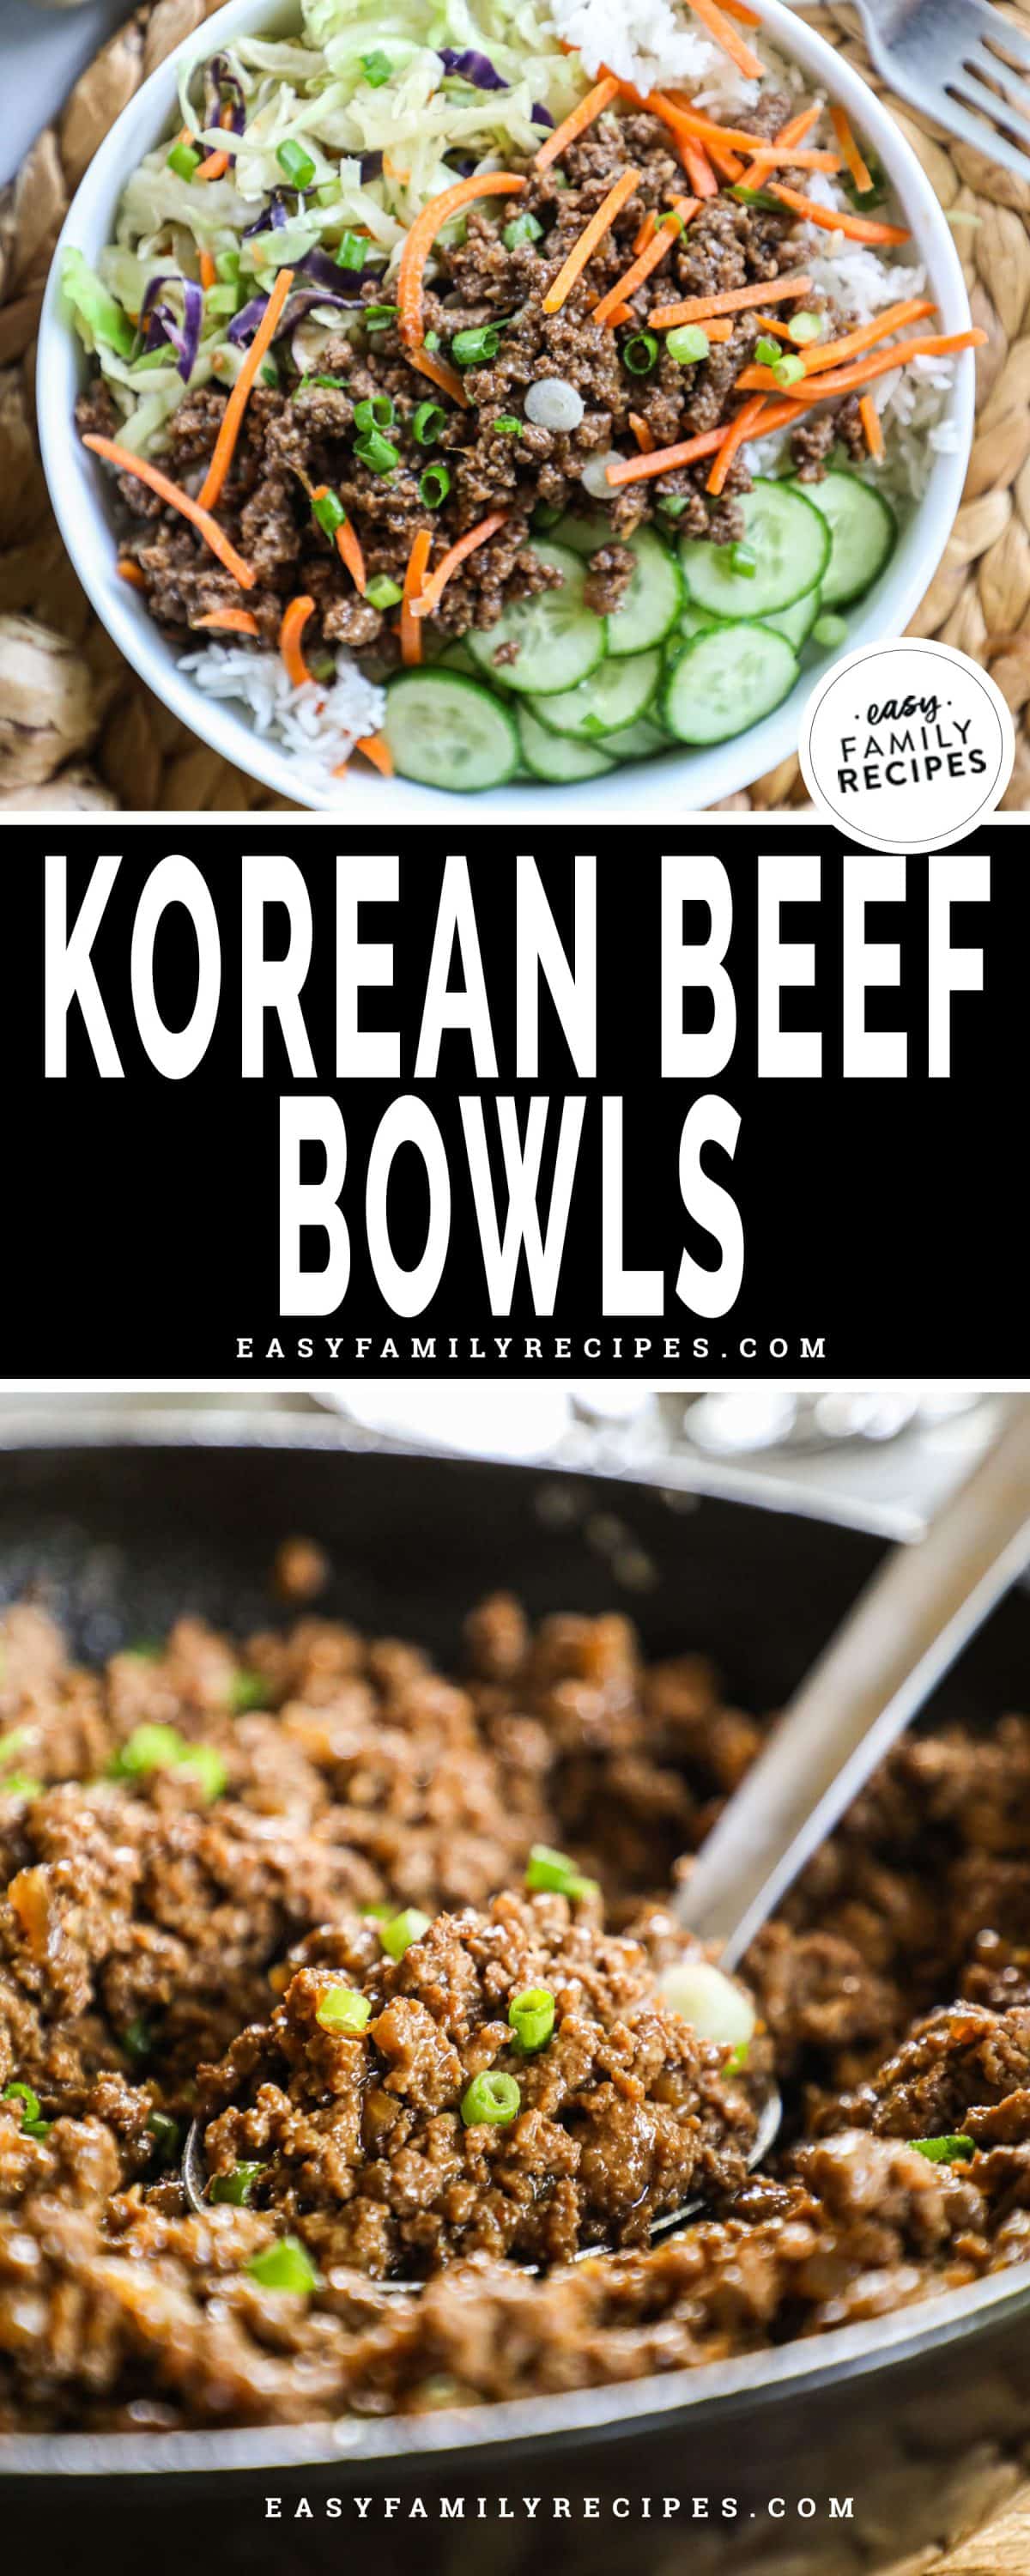 Completed korean beef bowl with rice, cucumbers, beef, and carrots and another image with korean beef being cooked in a skillet.